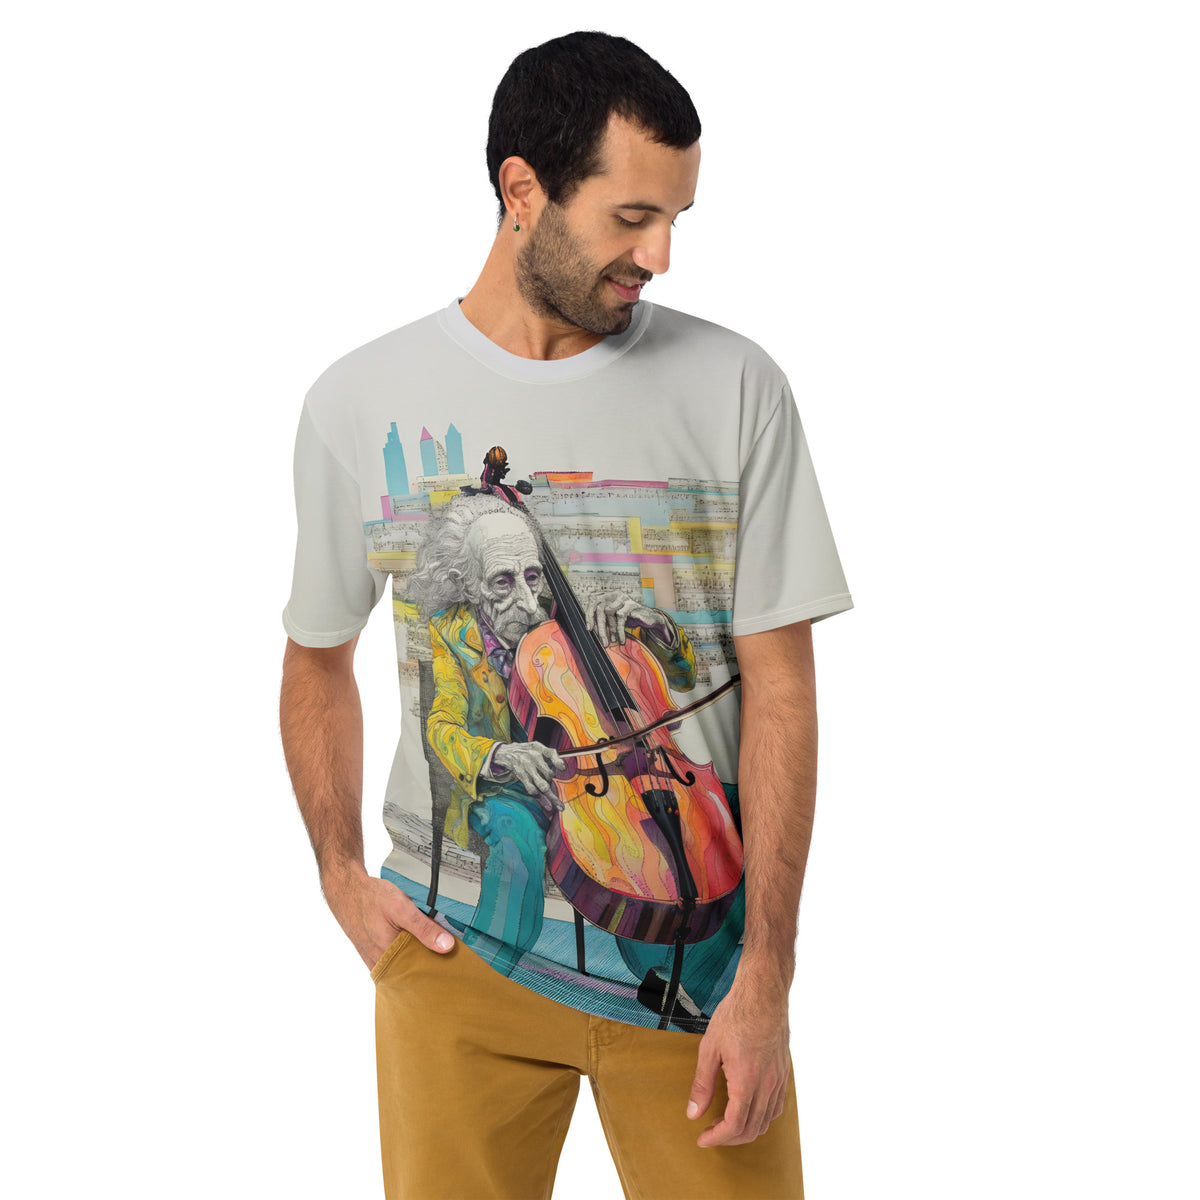 Sonic Surge Men's Crew Neck T-Shirt in a vibrant pattern - front view.